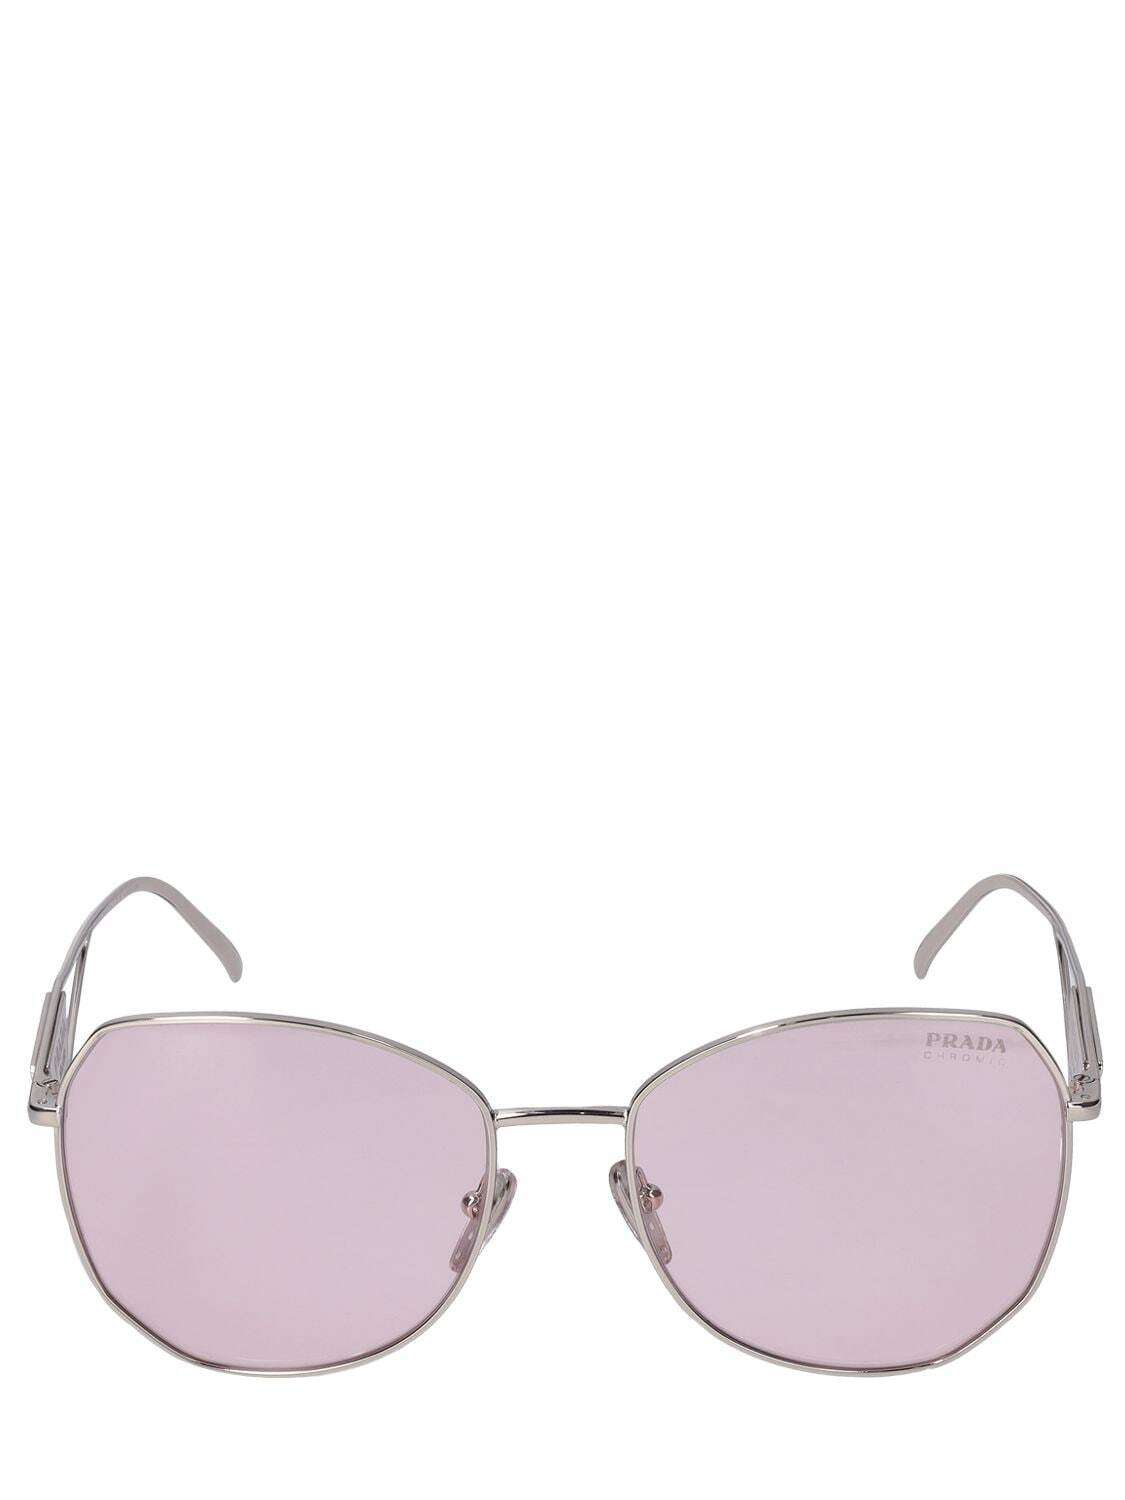 PRADA Obsesive Triangle Round Metal Sunglasses in pink / silver